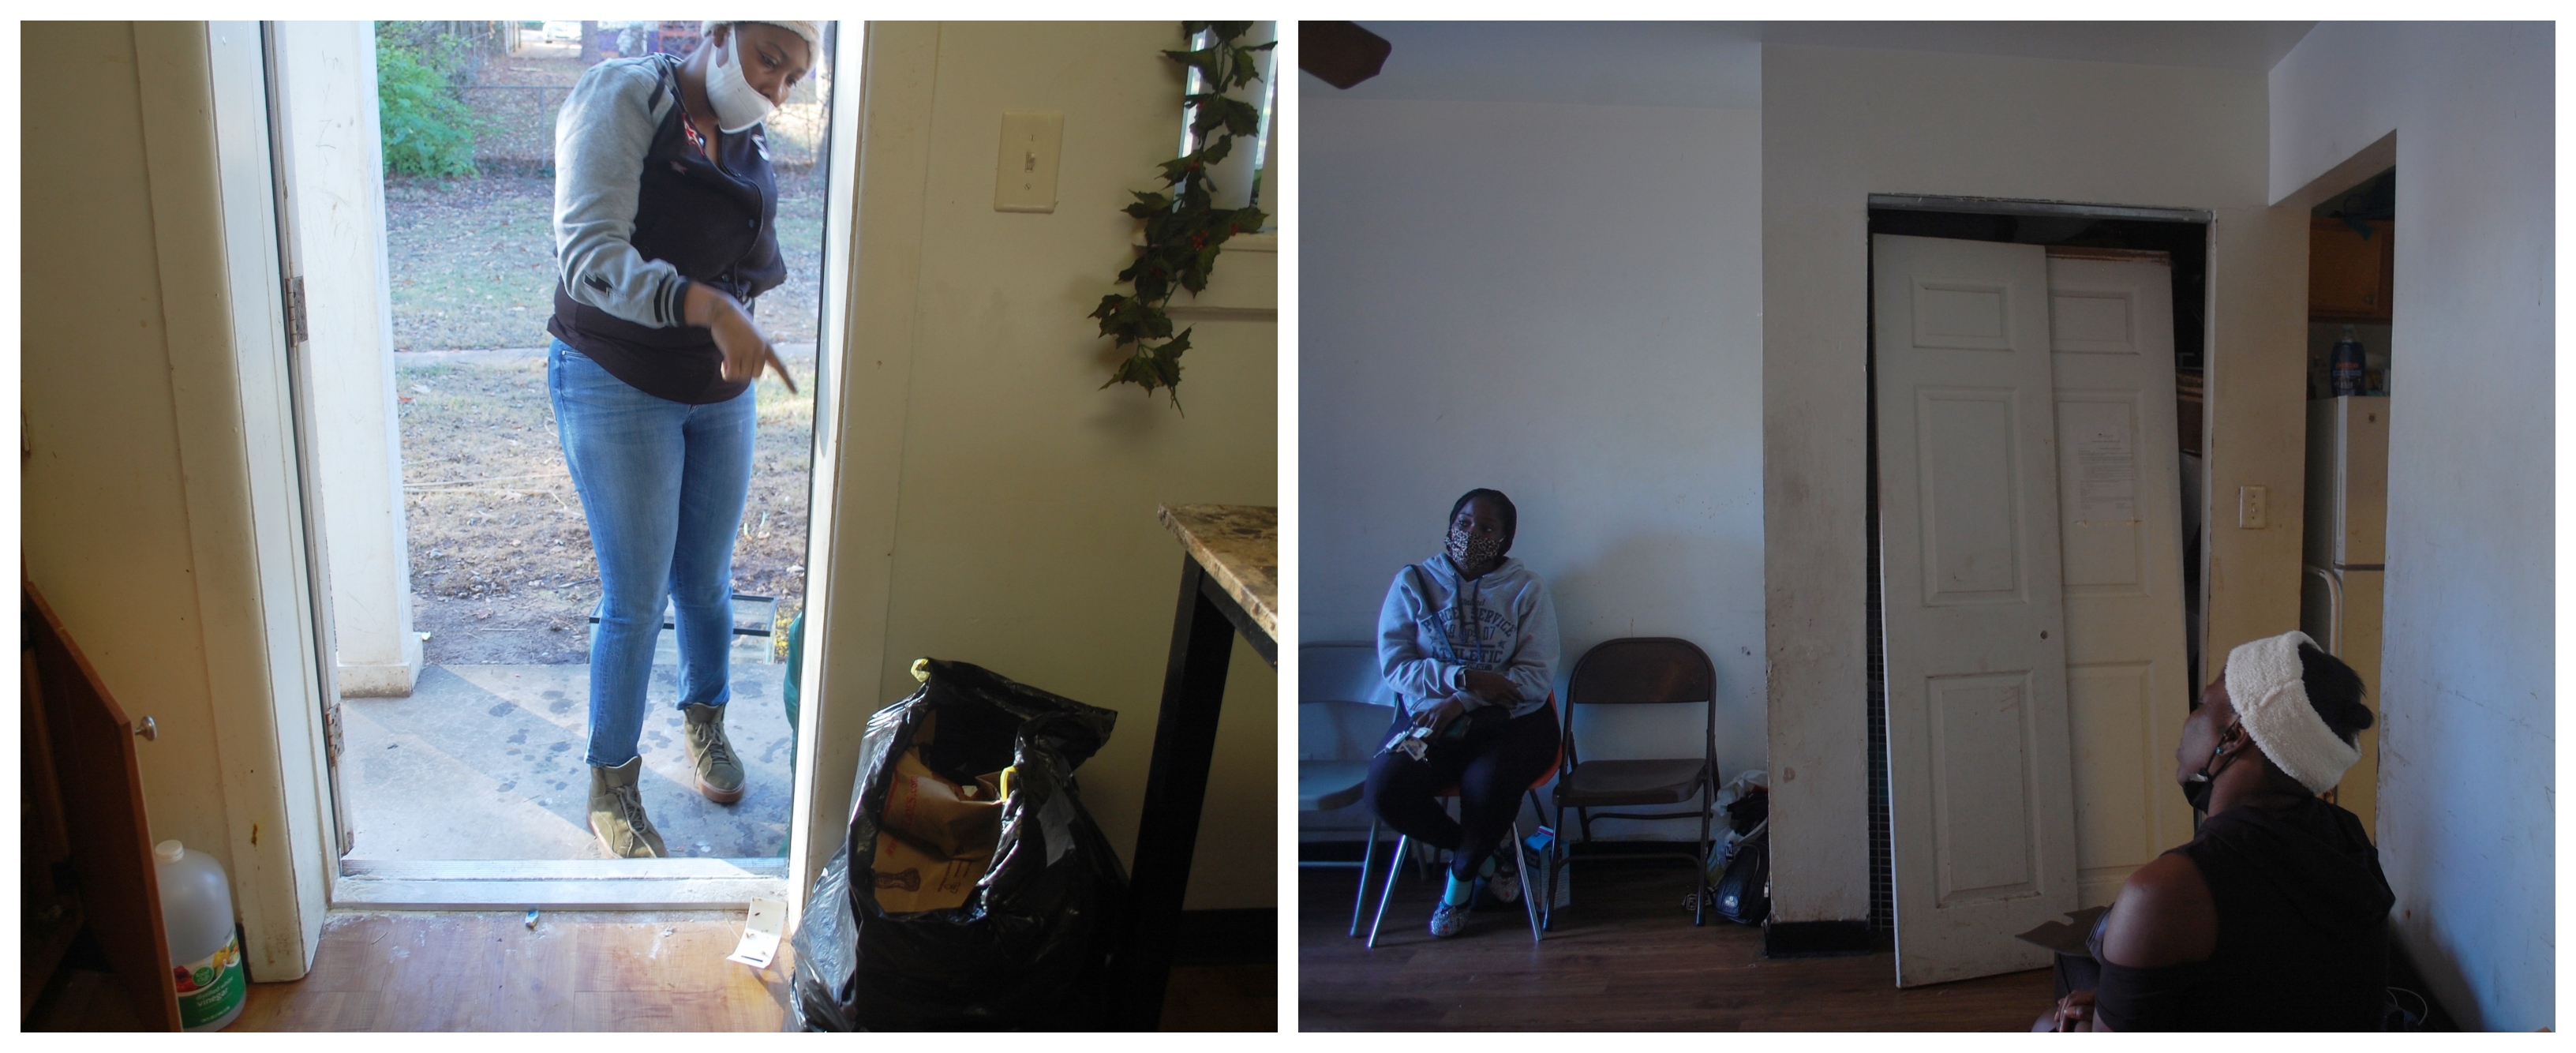 The tenants behind the new residents association at Trestletree say management issues constant lease violations and bans visitors from the complex while questioning their requests for repairs. Here, the tenants point out ongoing roach infestations and broken closet doors. (Photos by Stephannie Stokes/WABE)